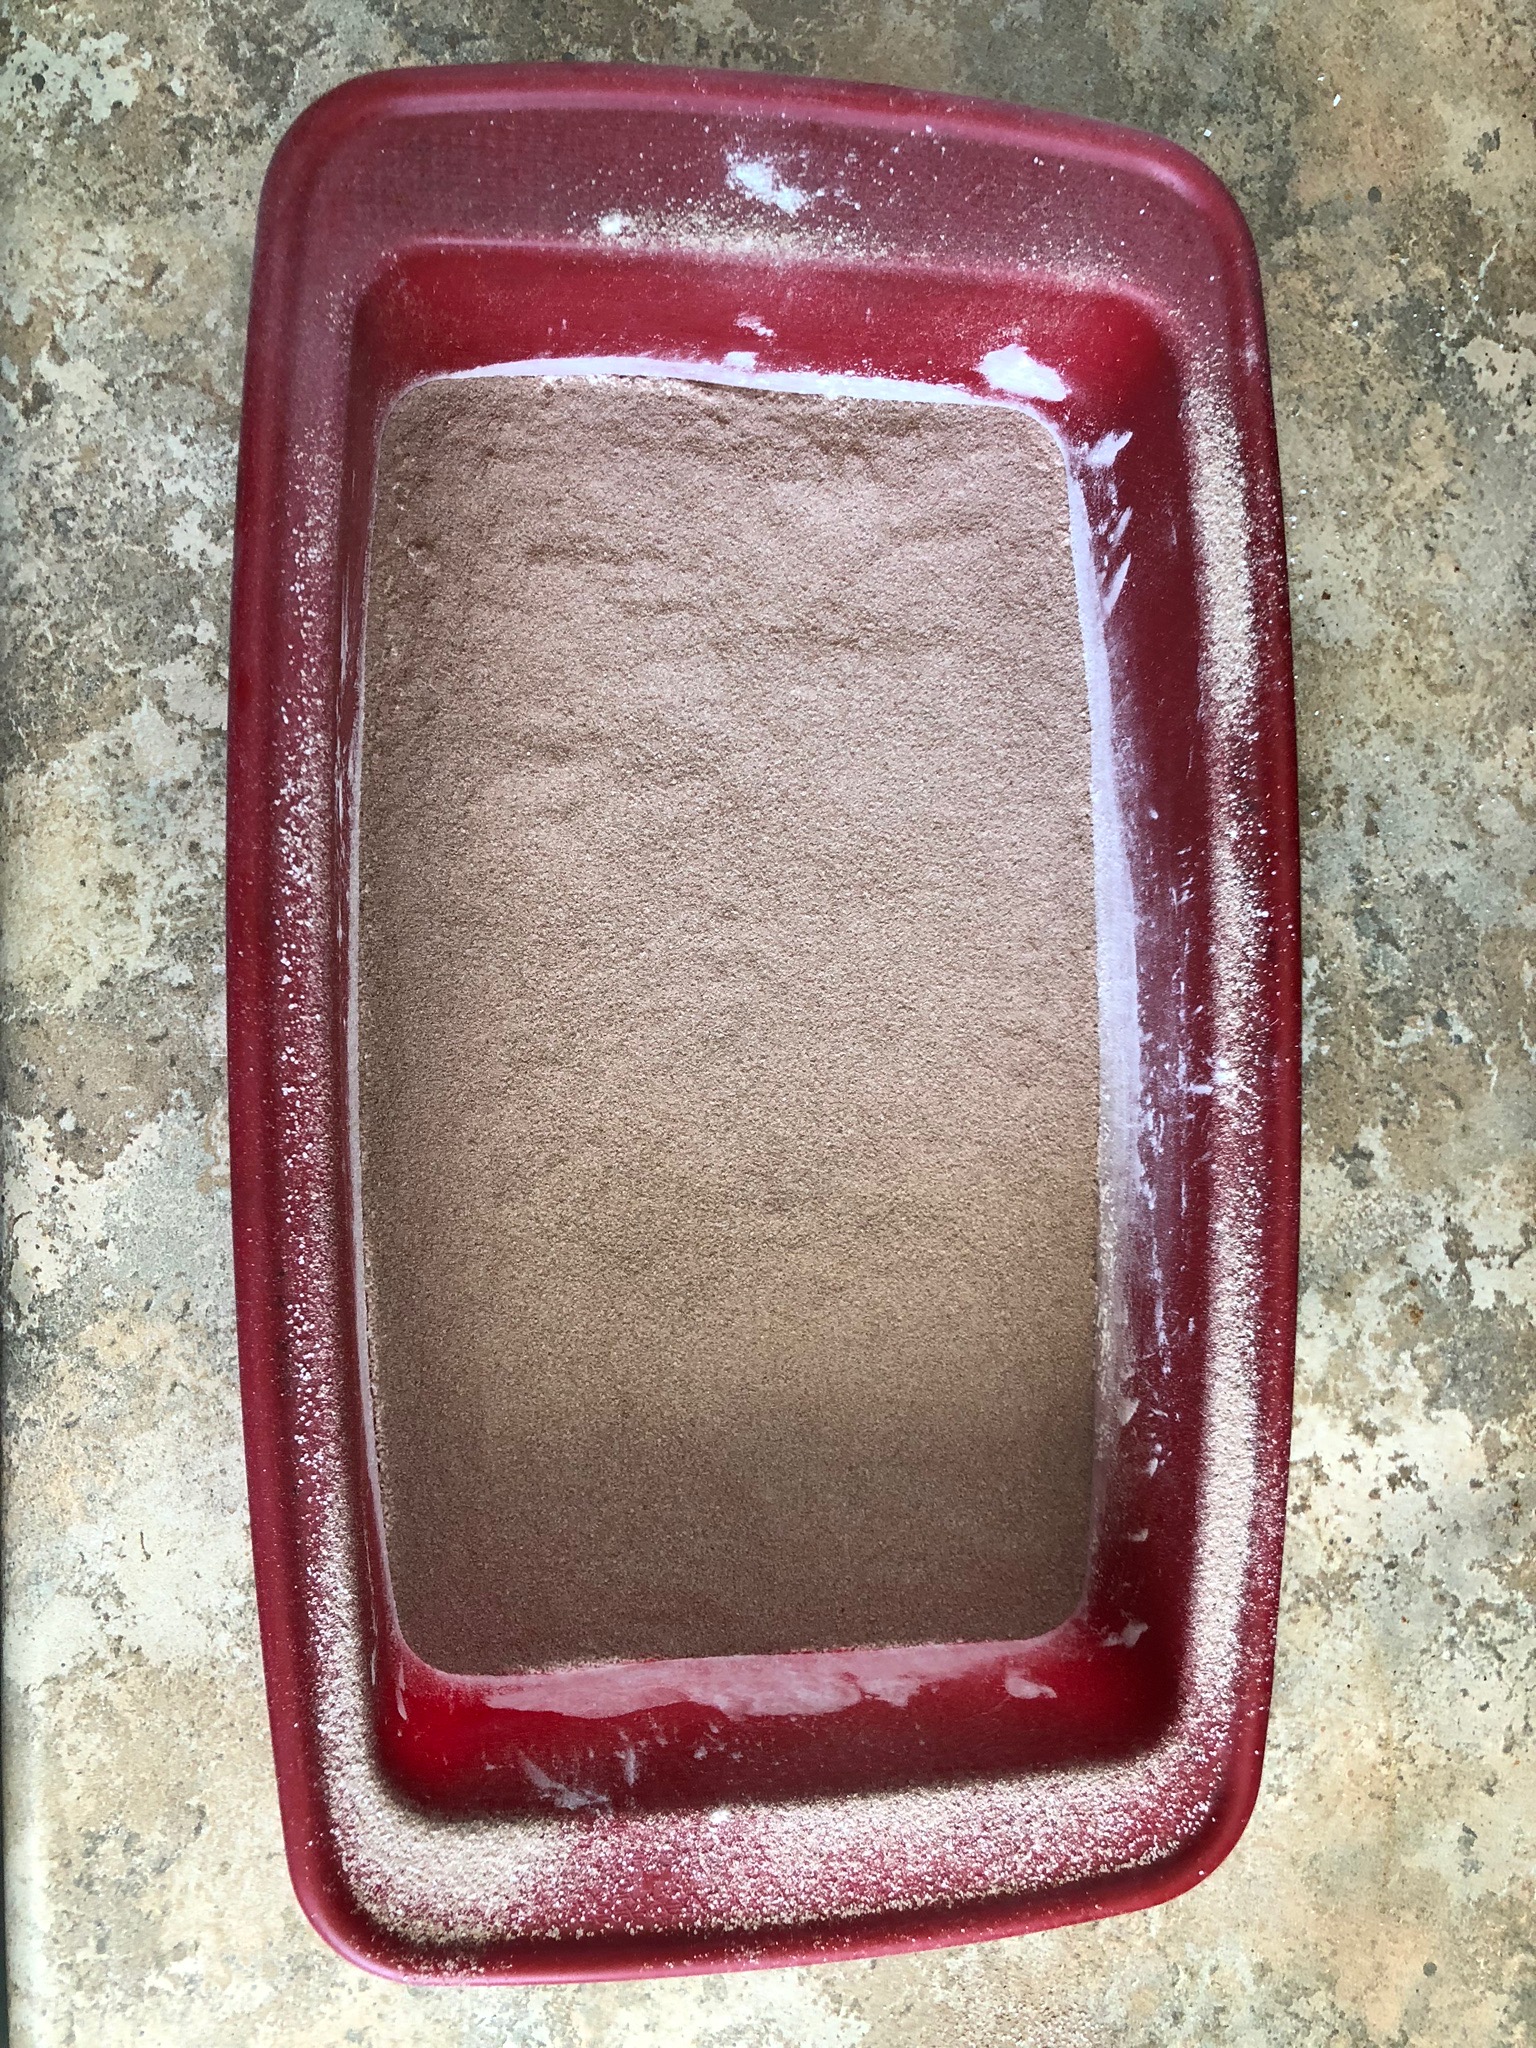 A silicone bread pan filled with flour, covered with a thin dusting of hot chocolate.